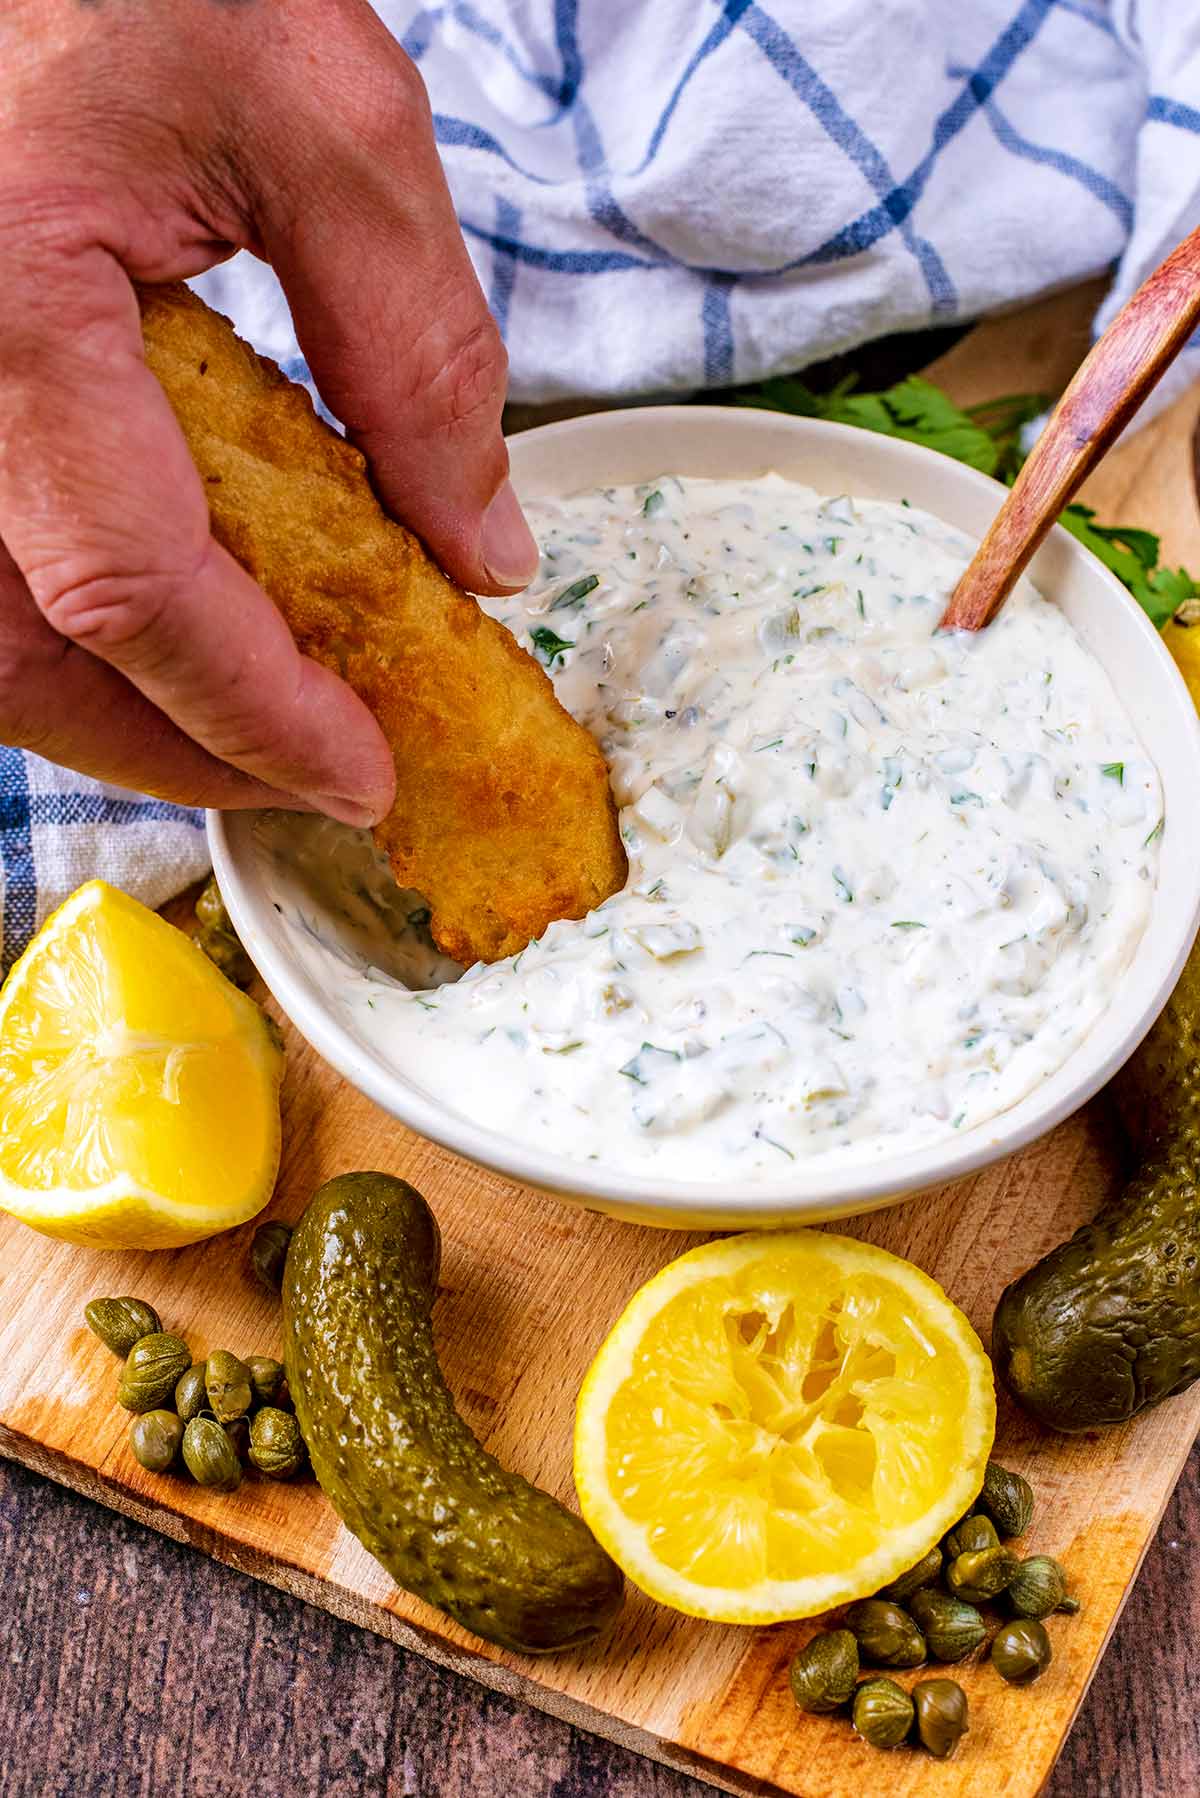 A hand dipping a fish finger into a bowl of tartare sauce.